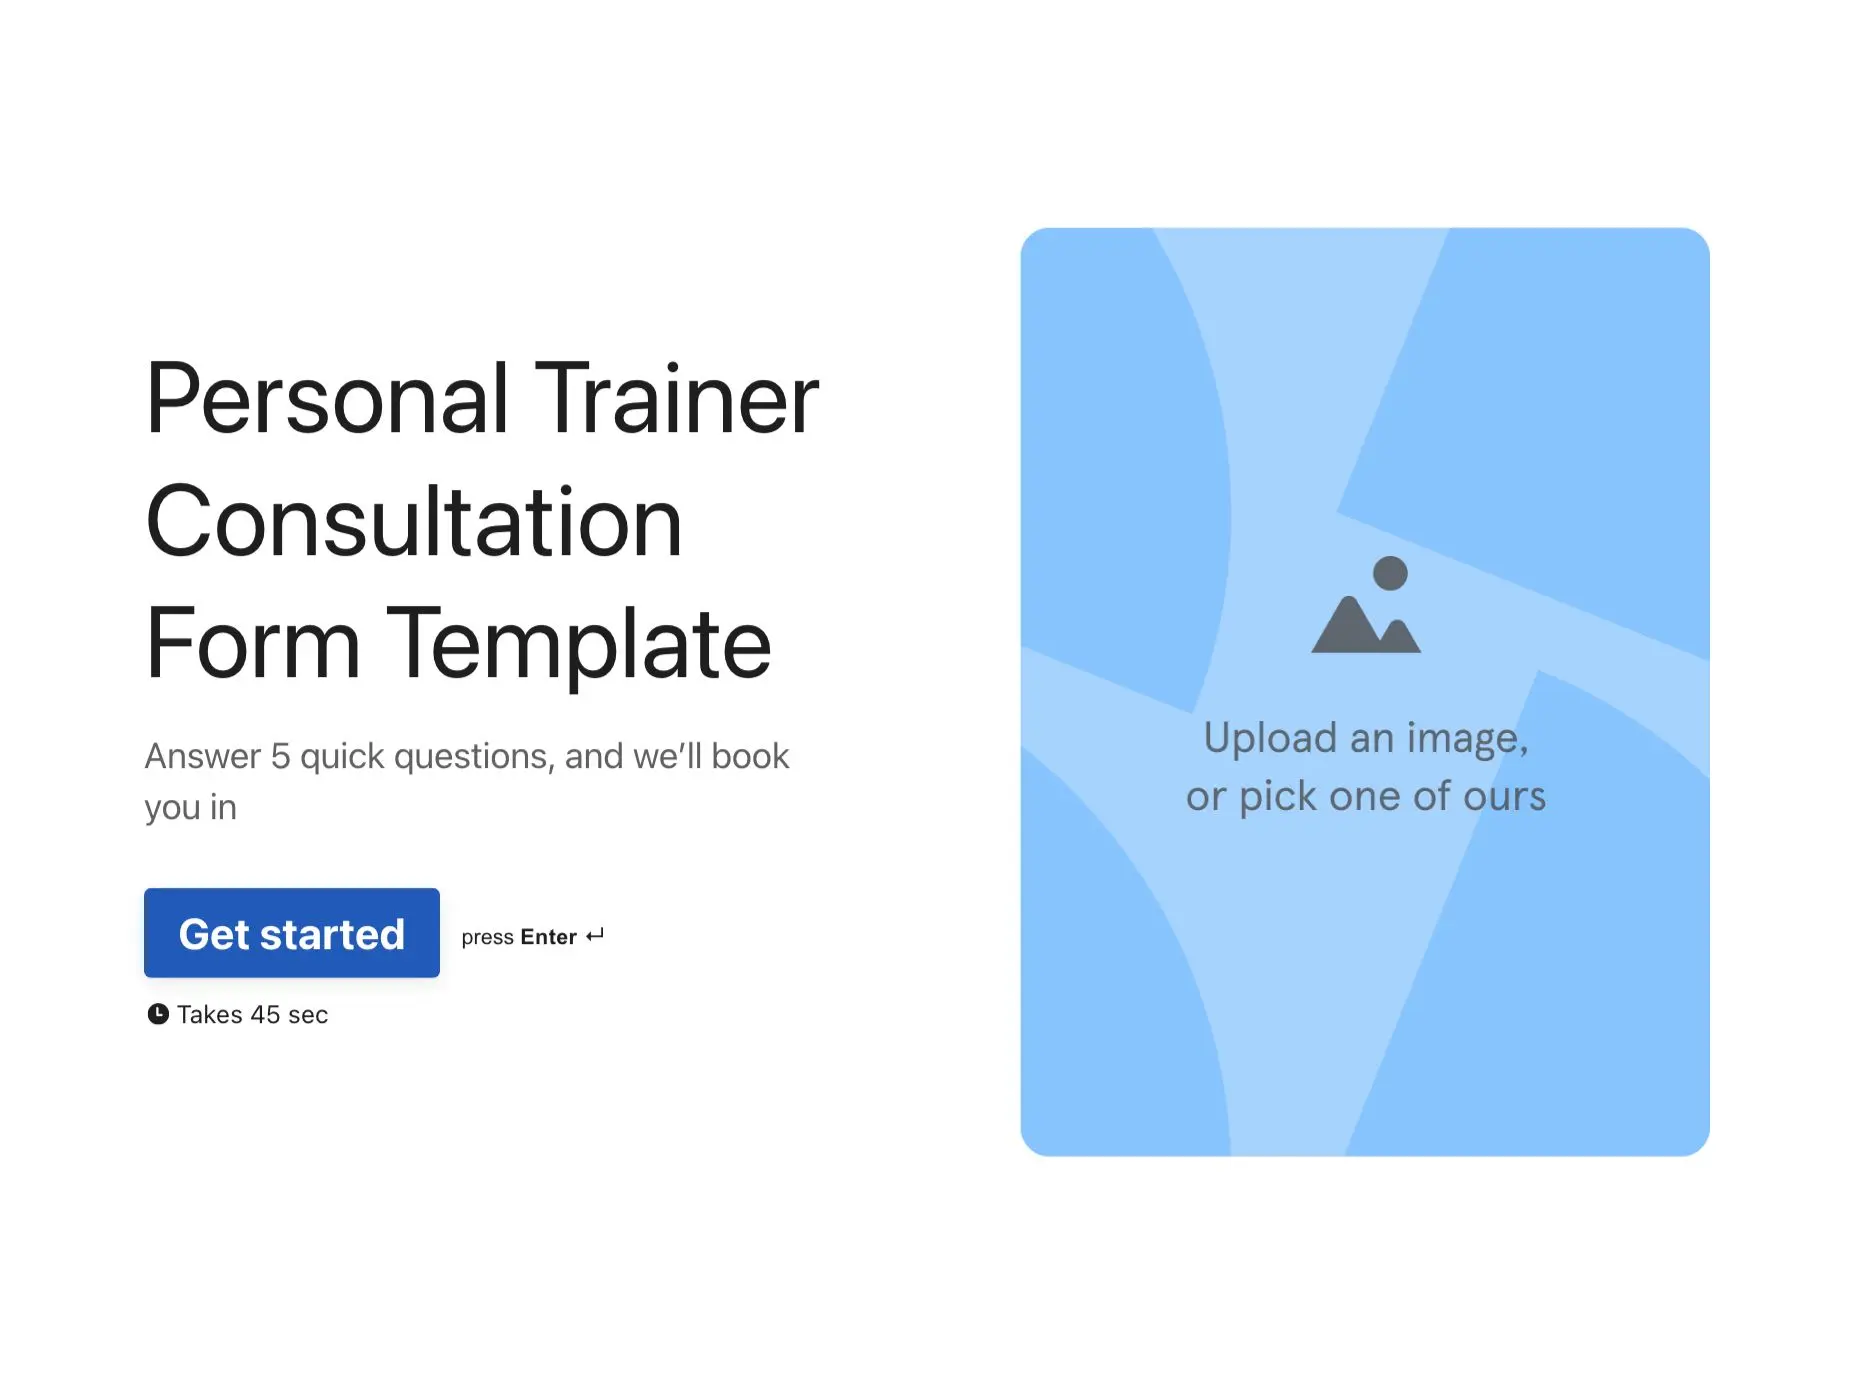 Personal Trainer Consultation Form Template Hero